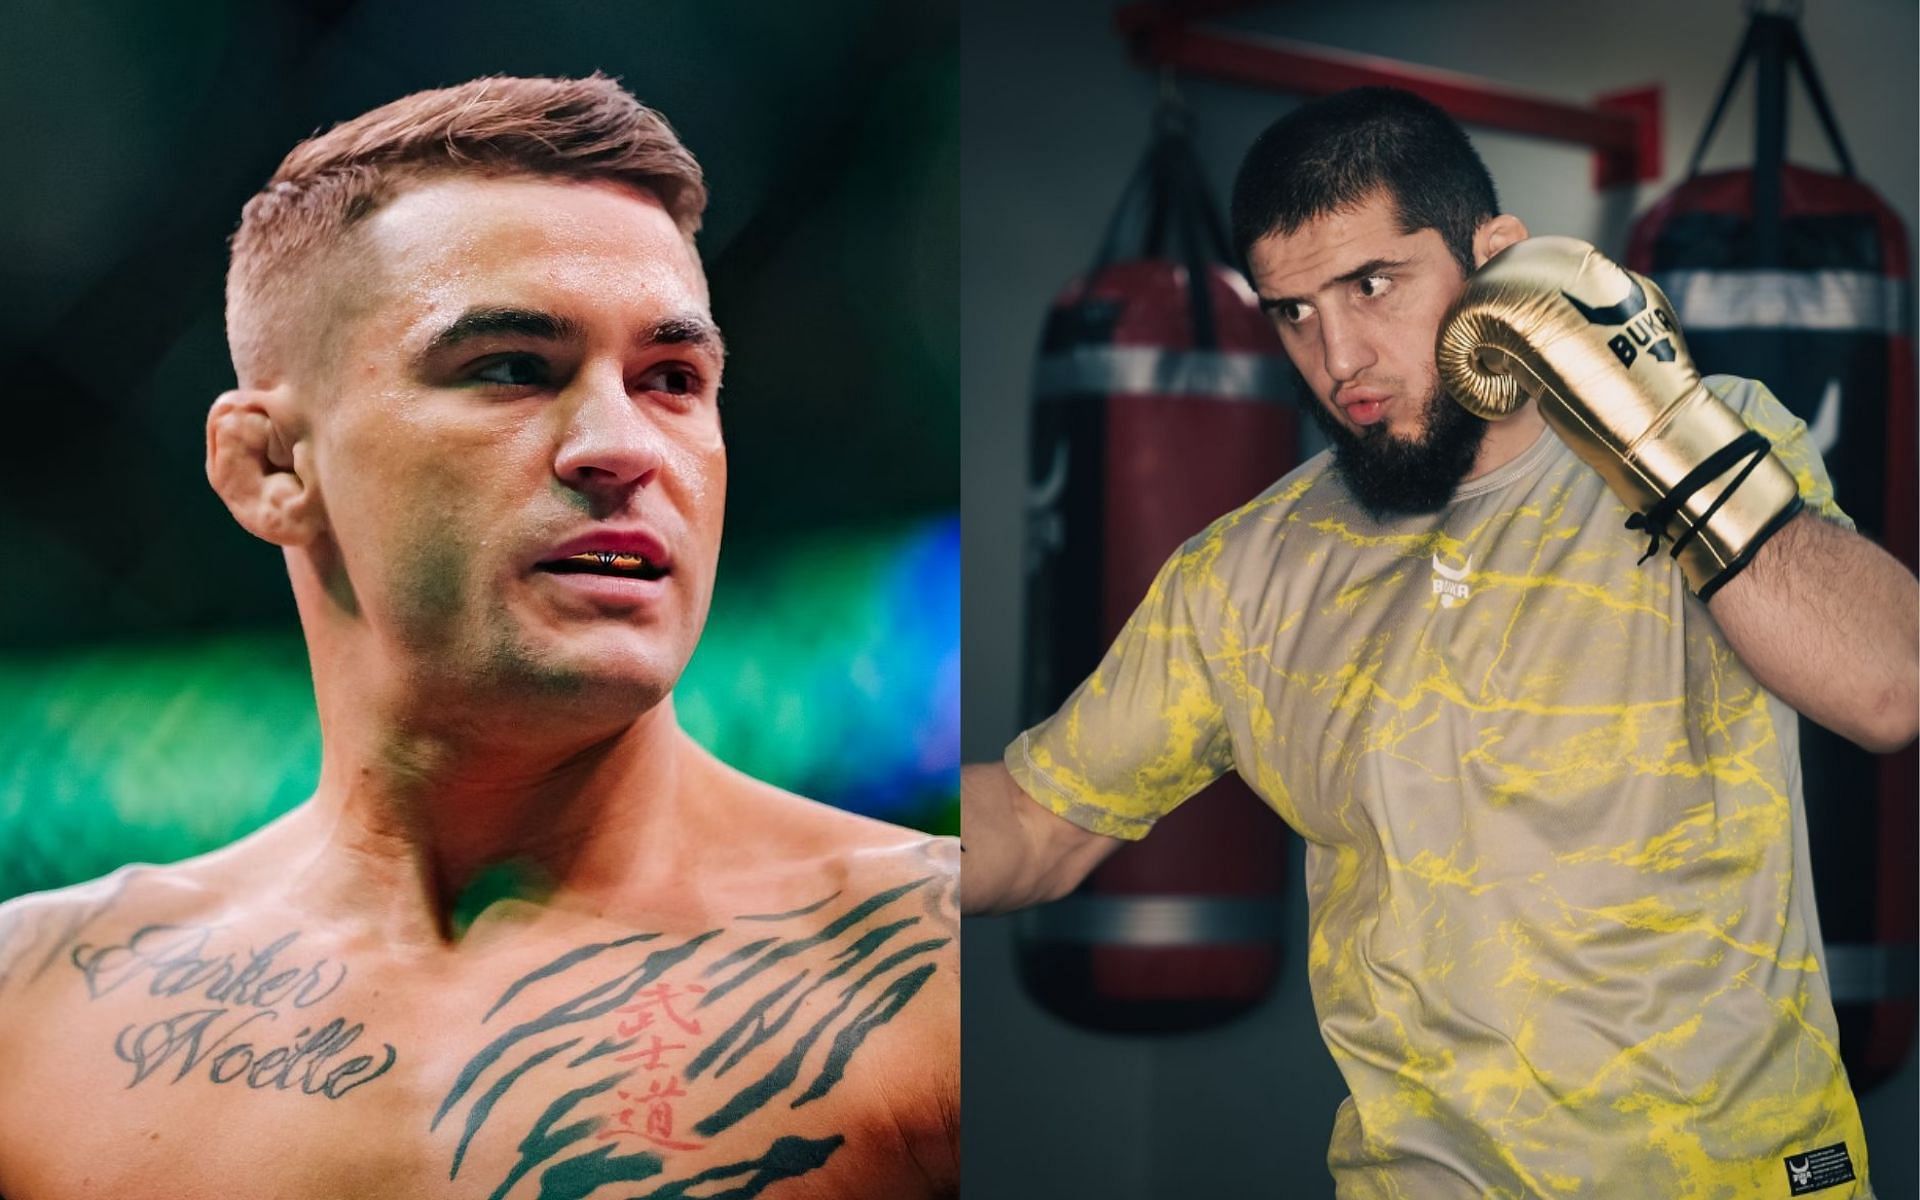 Dustin Poirier (left) eager to face Islam Makhachev (right) should 